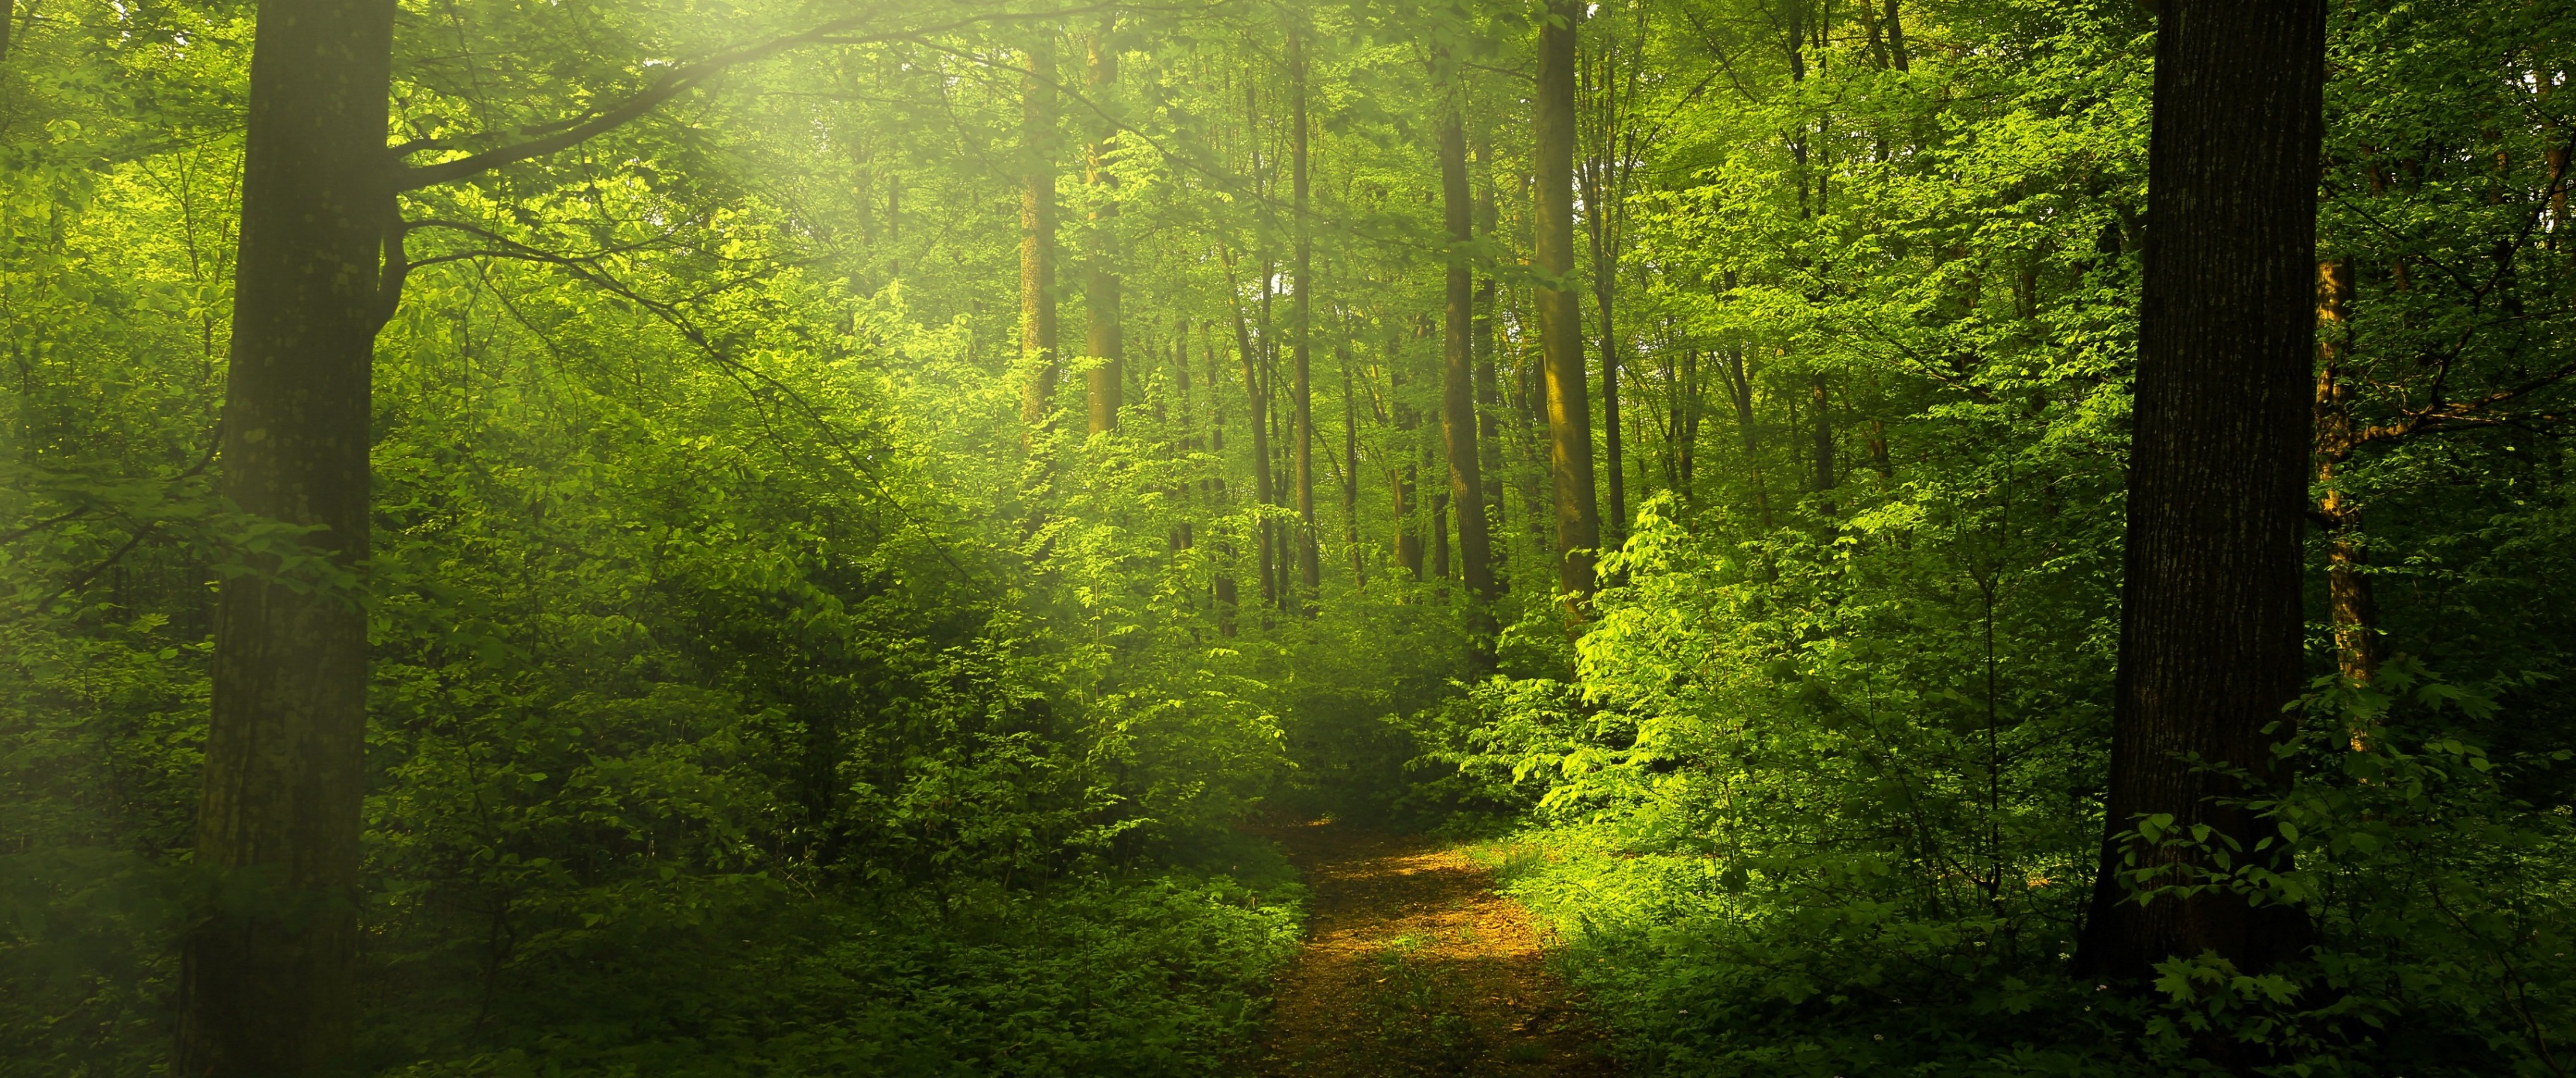 Green Forest Wallpaper 4K, Woods, Trails, Pathway, Nature